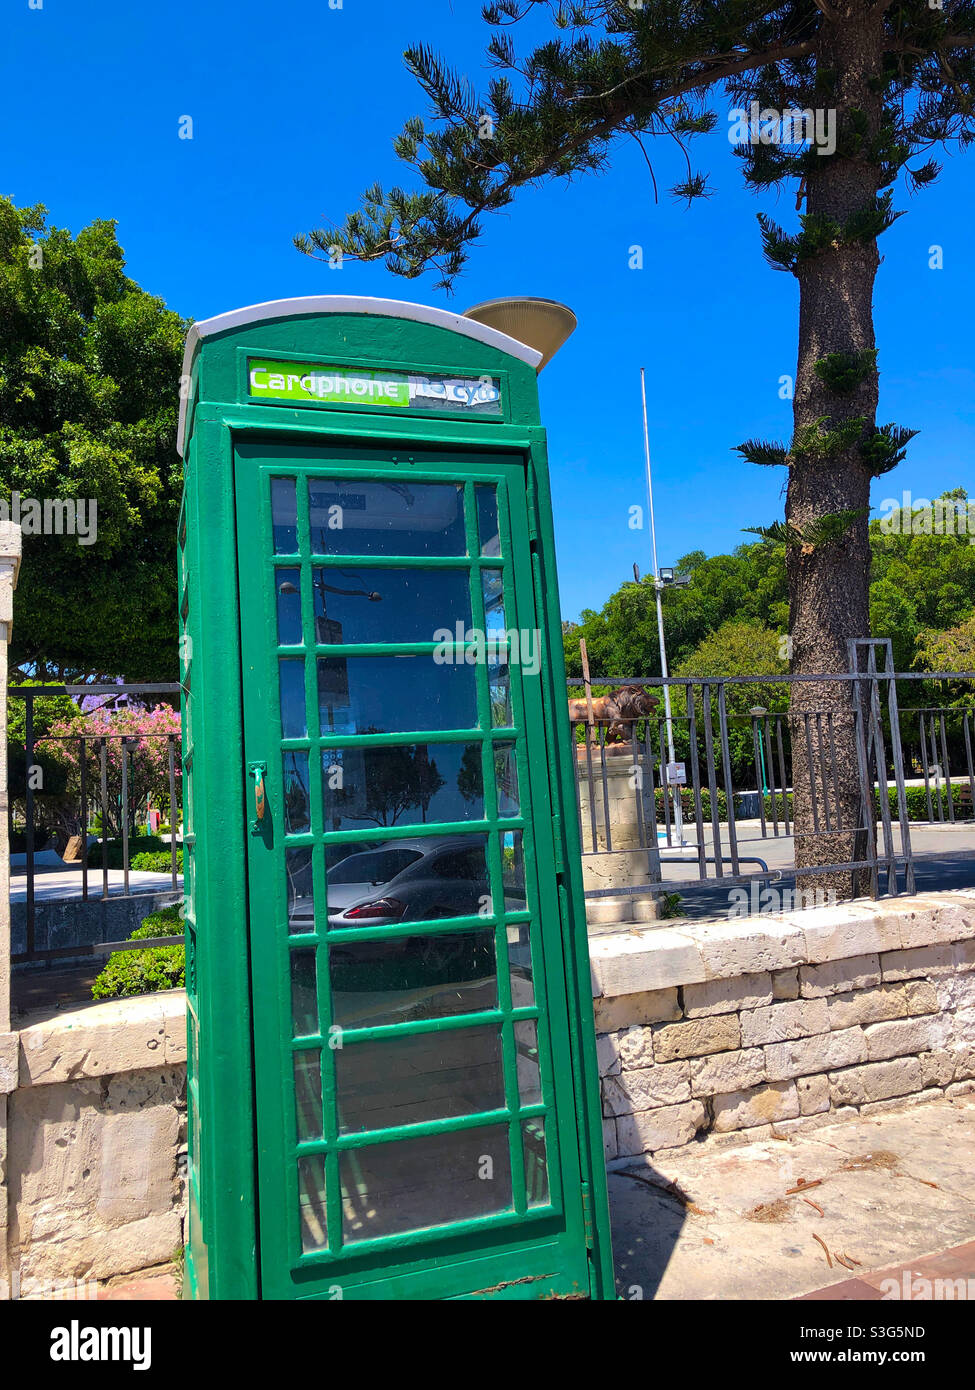 A former British phone box painted green in Limassol, Cyprus Stock Photo